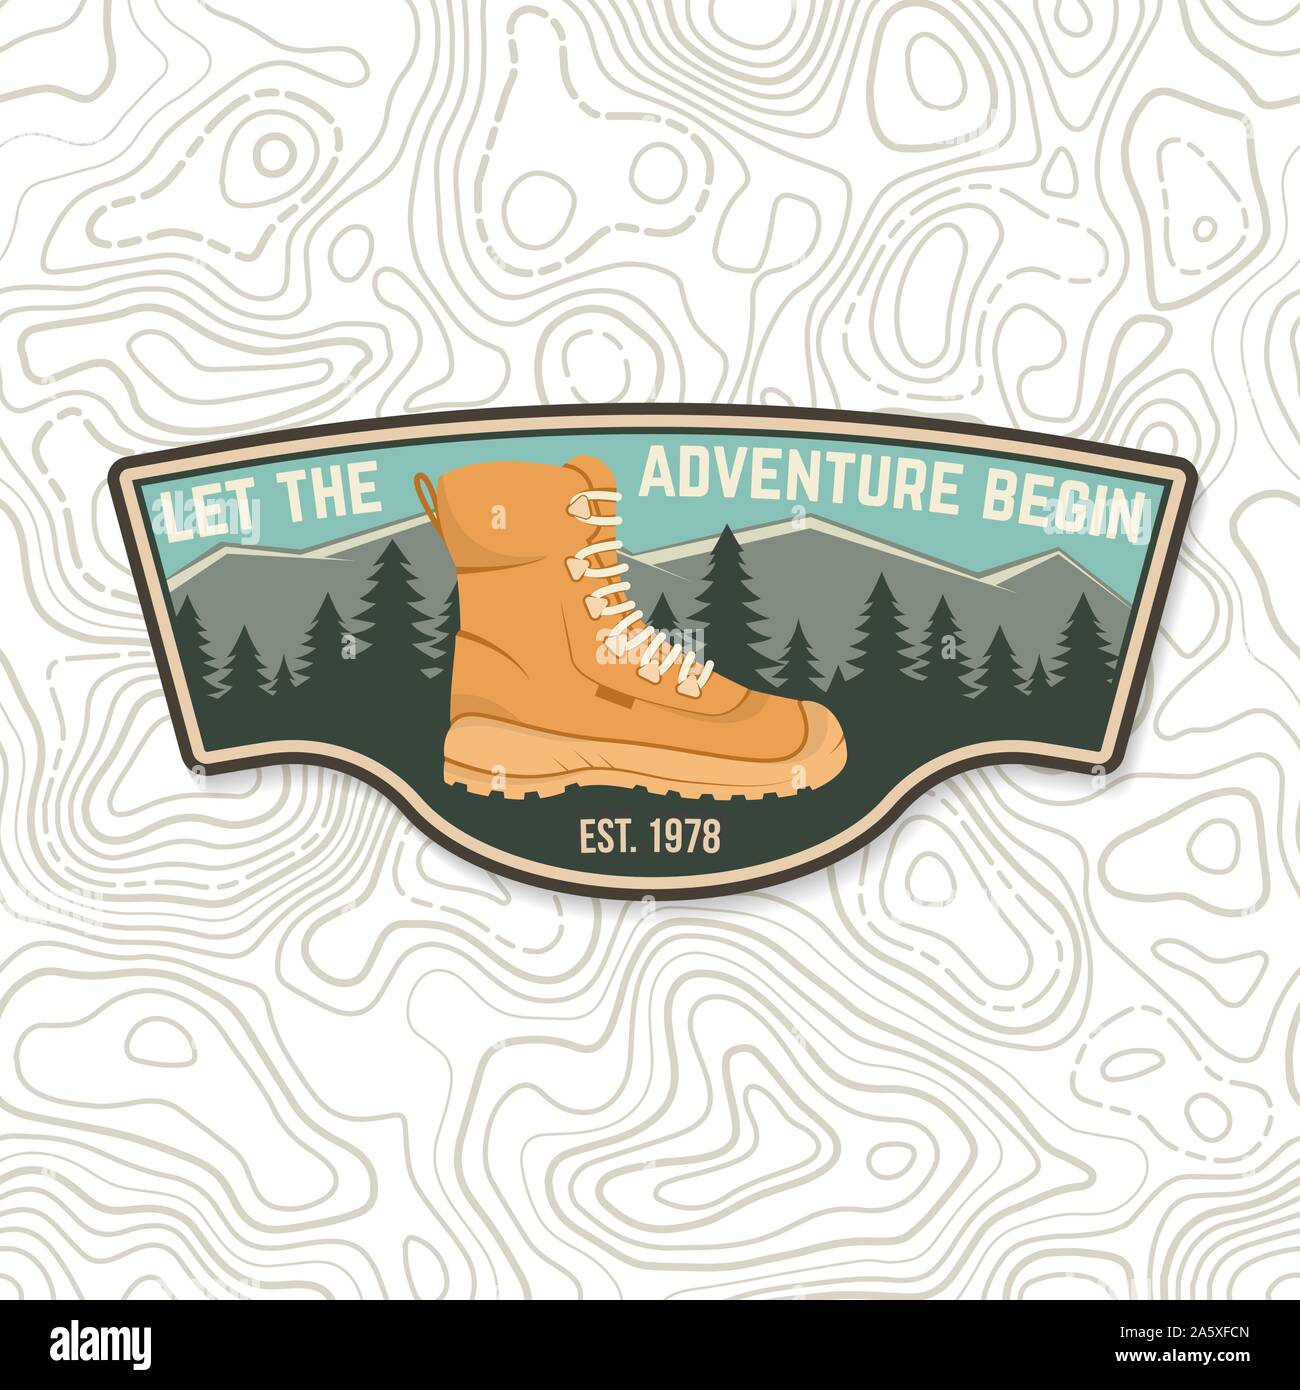 Let the adventure begin. Sammer camp badge. For patch, stamp. Vector illustration. Concept for shirt or logo, print, stamp or tee. Design with hiking boots, mountains, sky and forest silhouette. Stock Vector